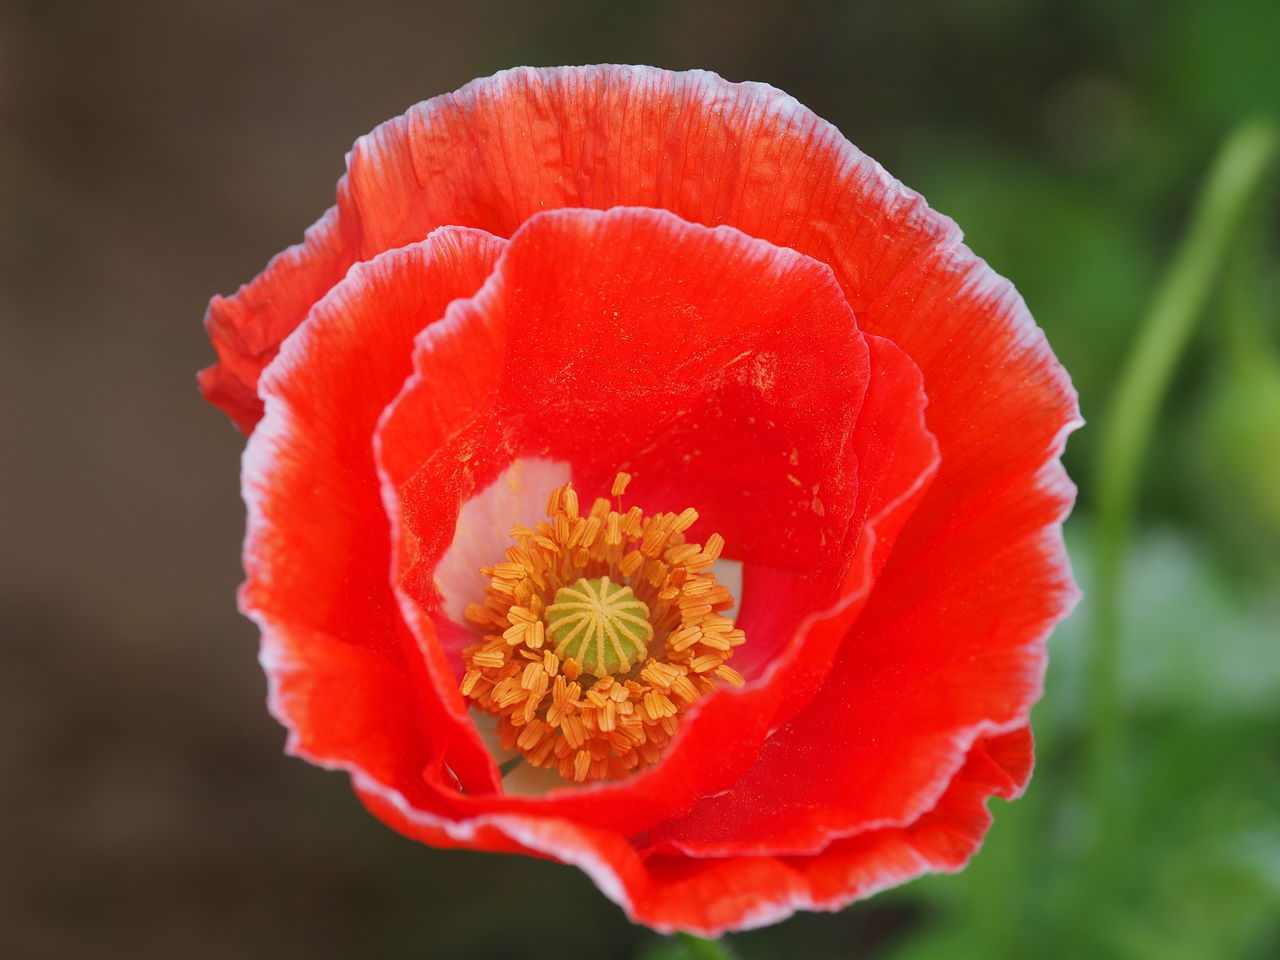 CLOSE-UP OF RED POPPY HIBISCUS BLOOMING OUTDOORS